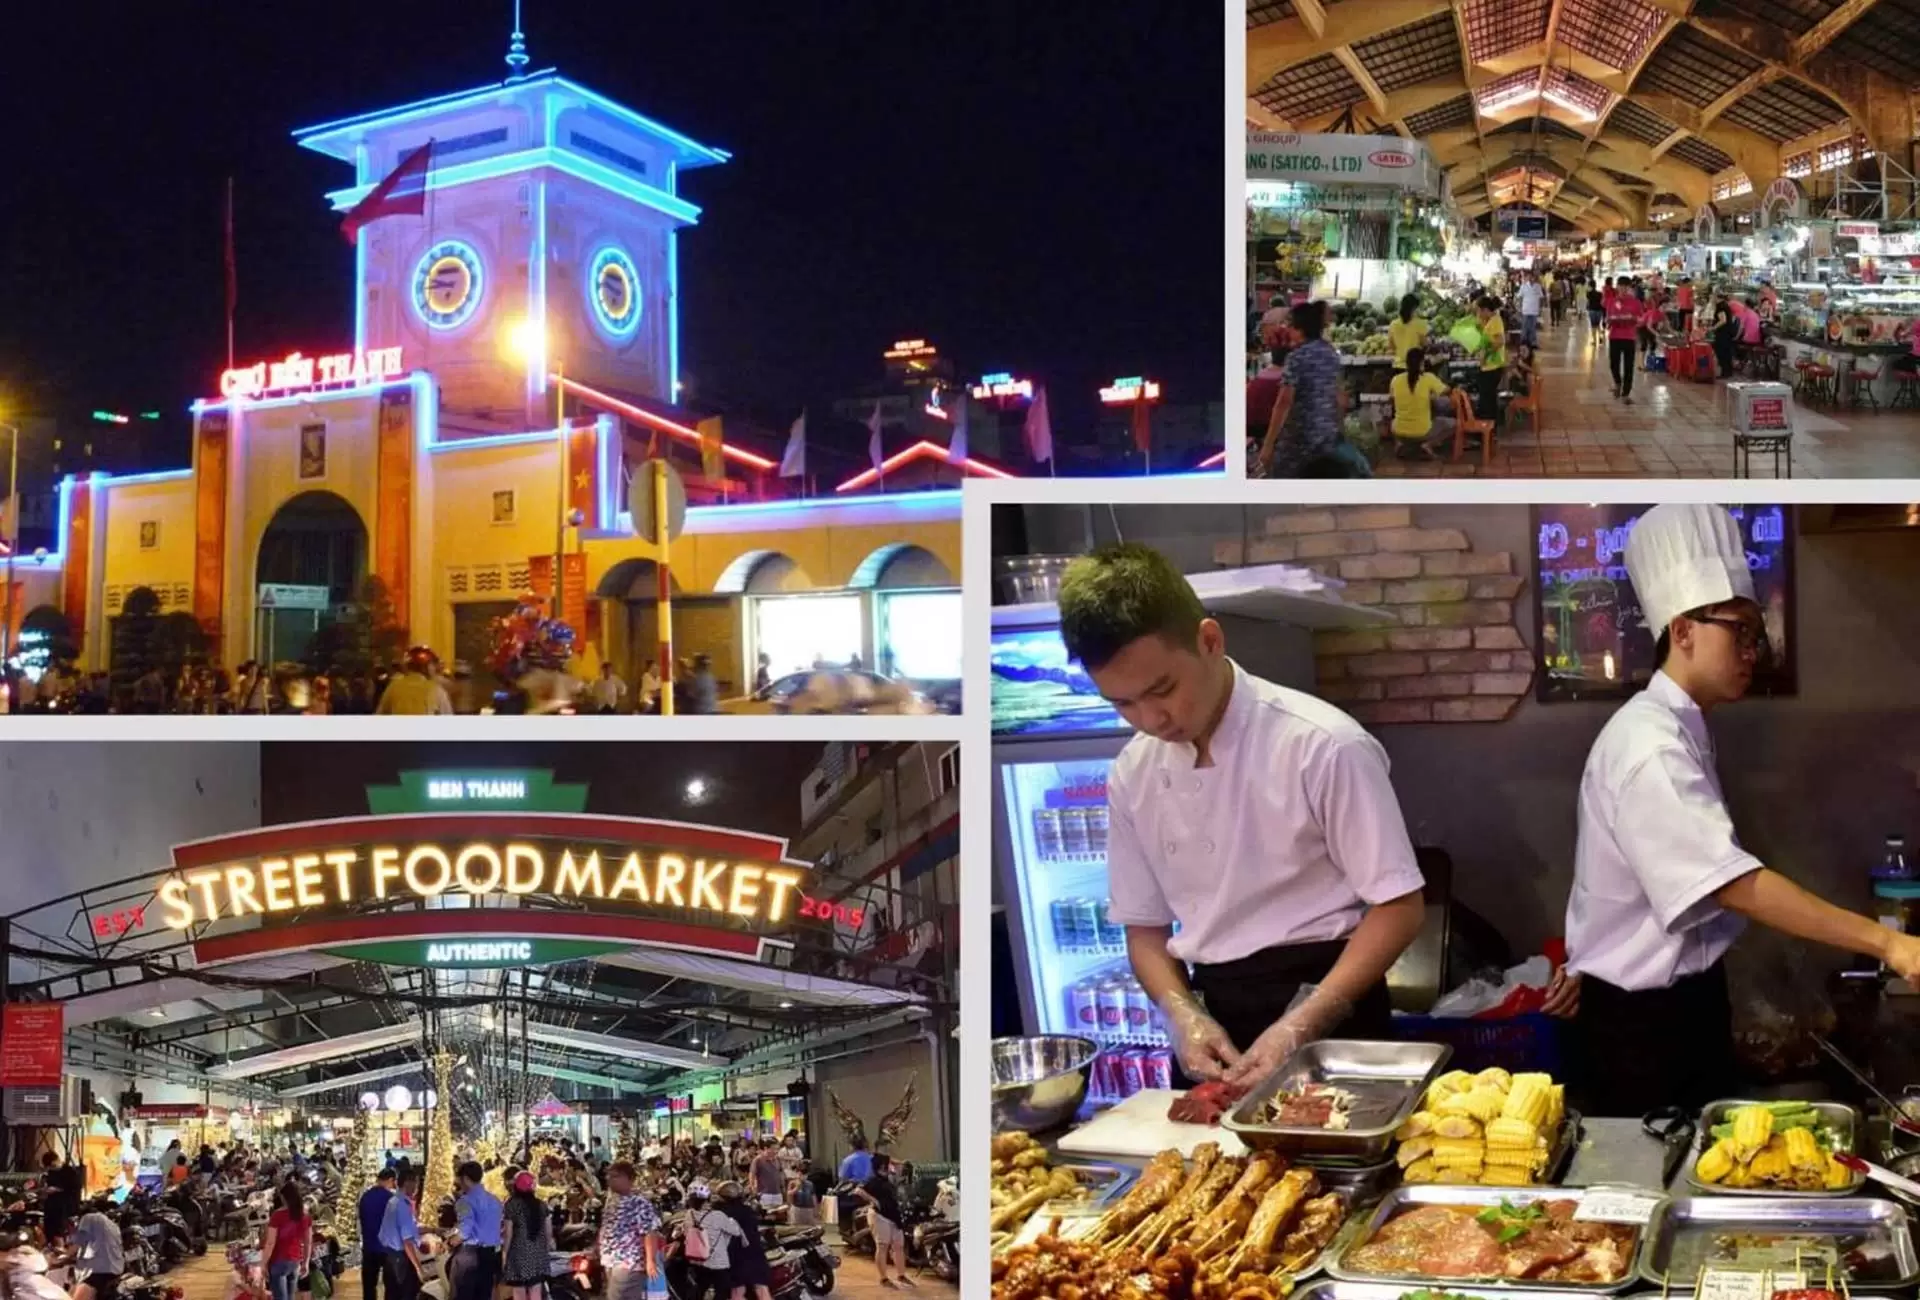 Bến Thành Night Market is one of the trendiest night markets in South East Asia.